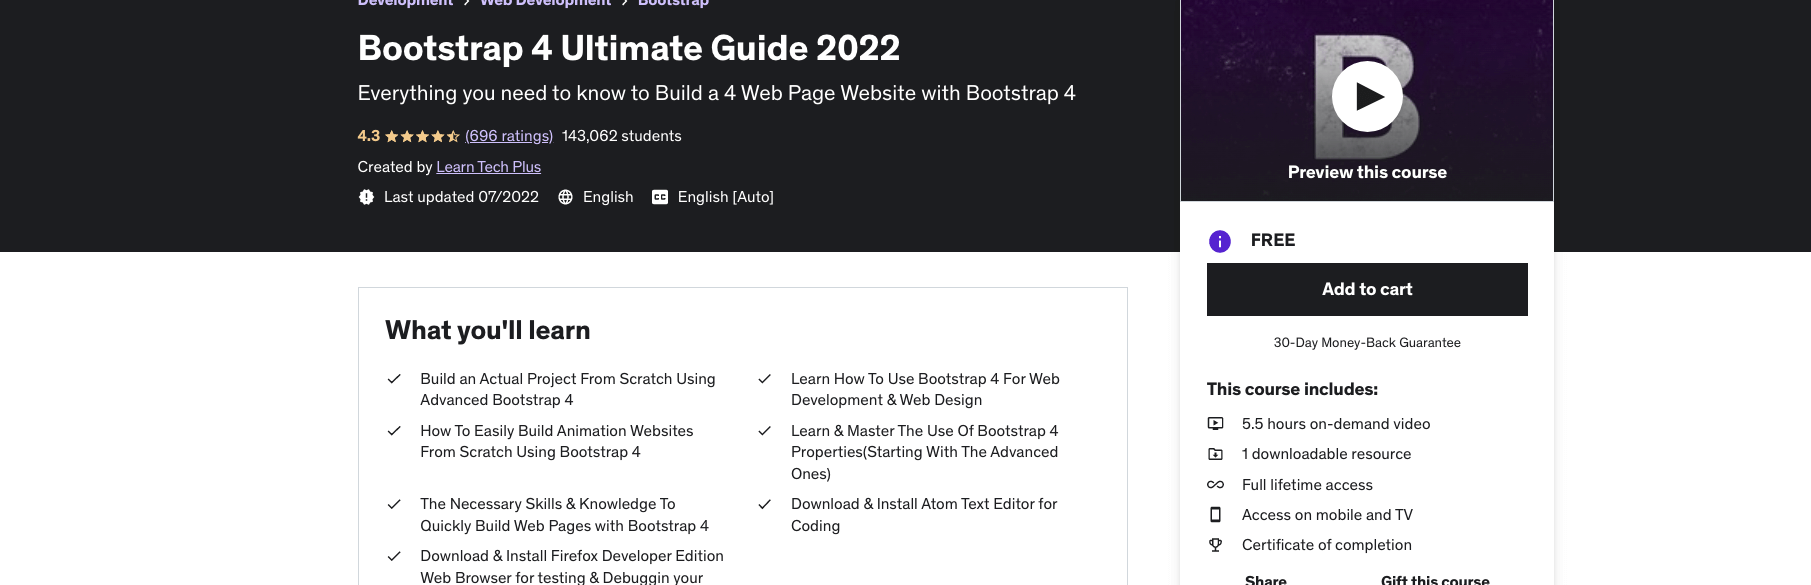 Bootstrap 4 Ultimate Guide 2022